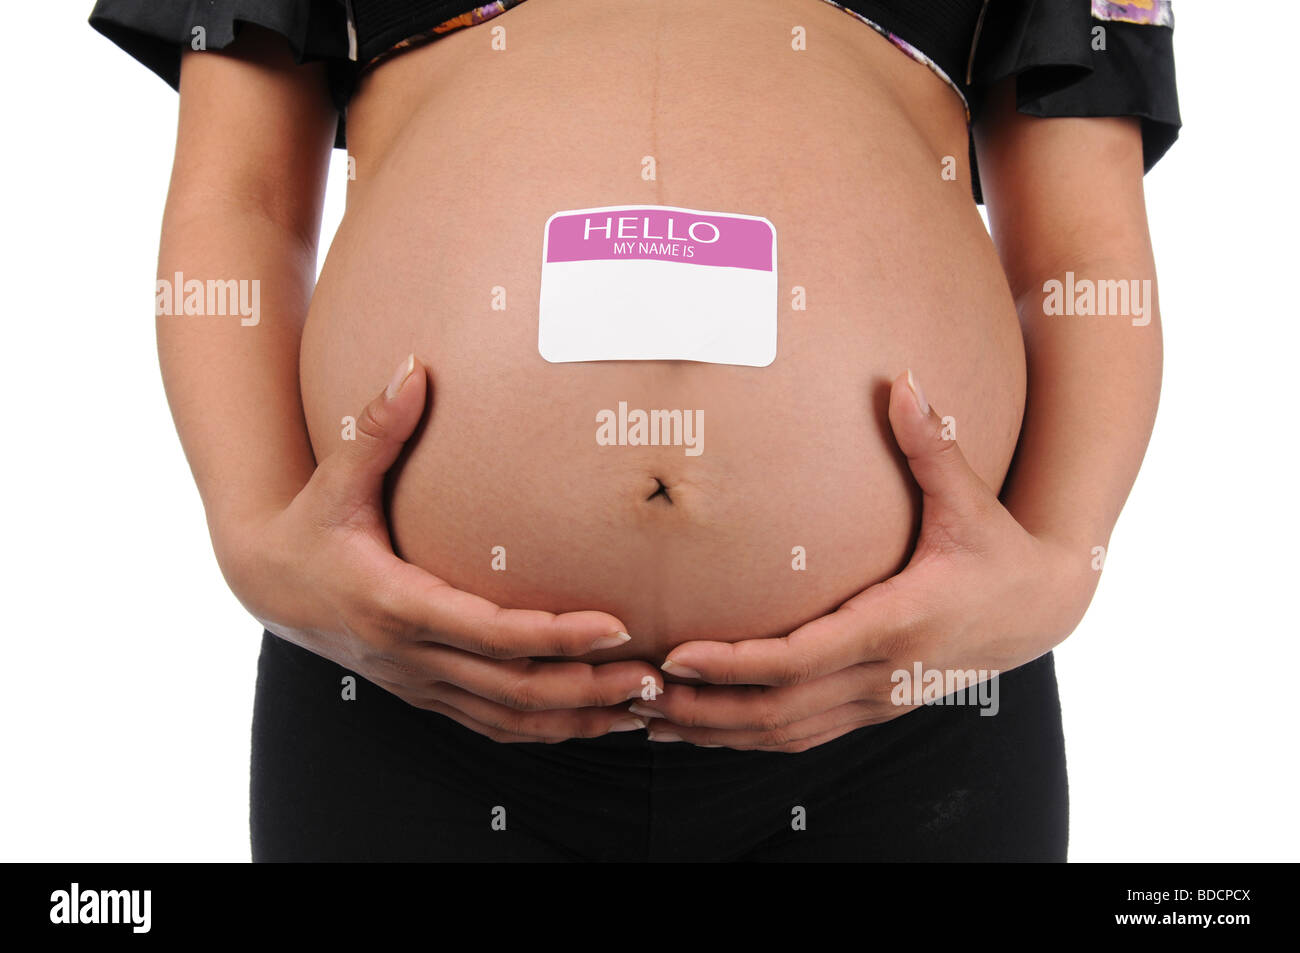 Pregnant woman holding stomach with name tag Stock Photo